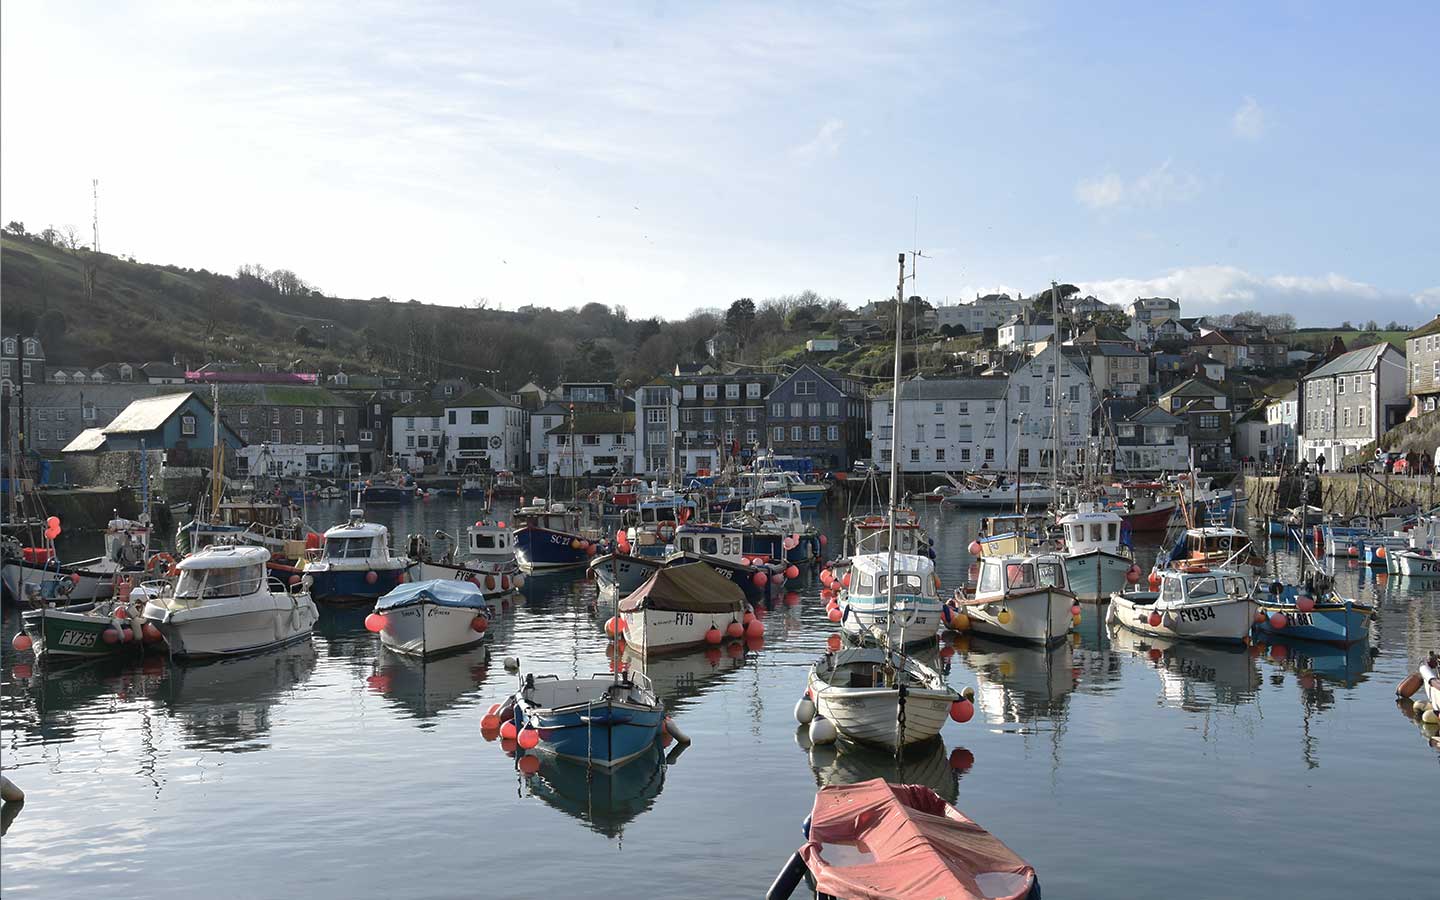 mevagissey fishing town in cornwall, uk